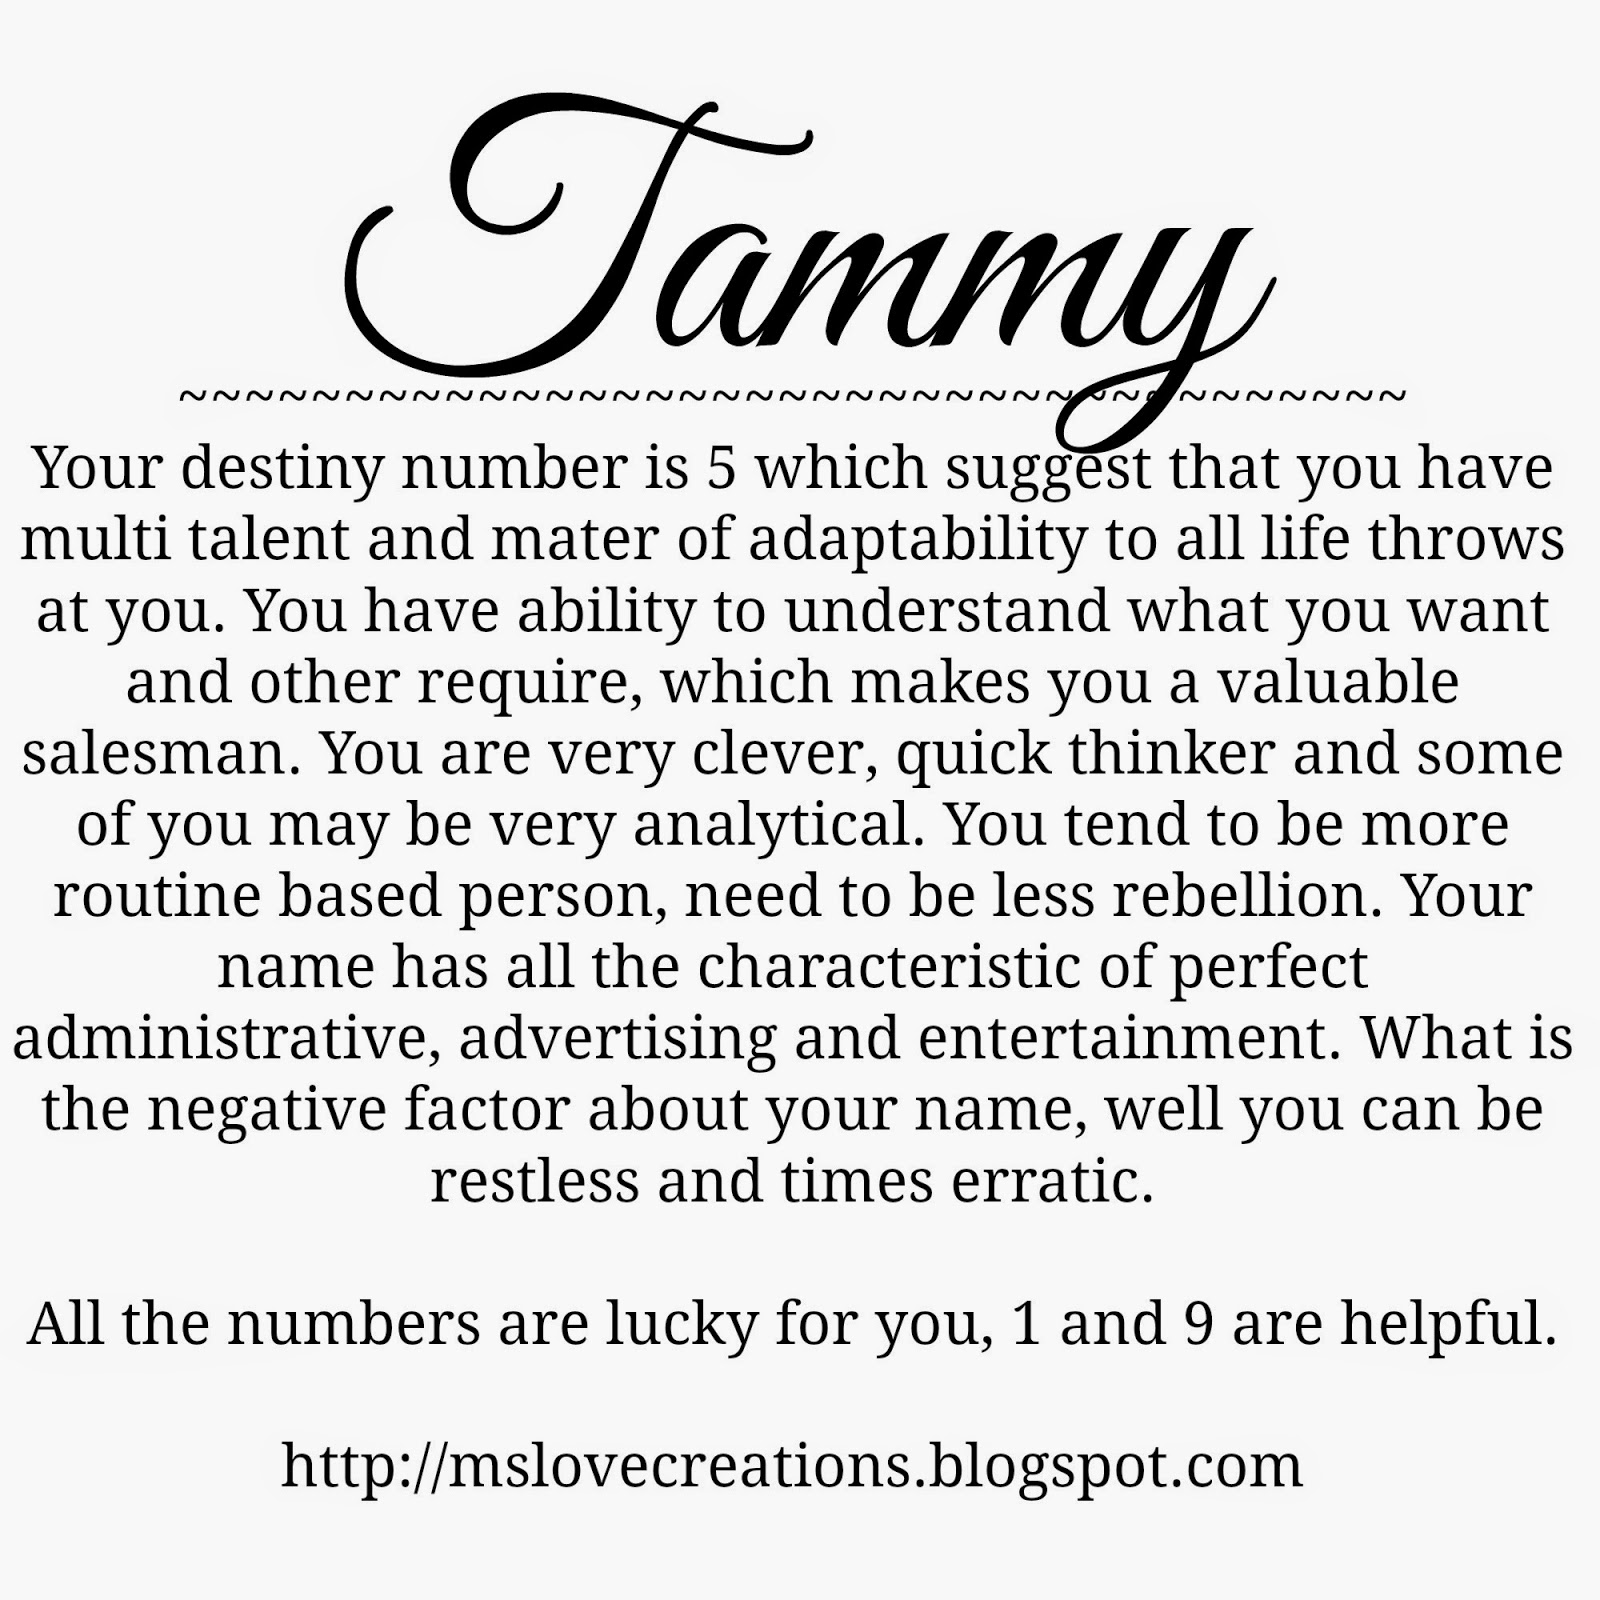 Tammy | MS creations